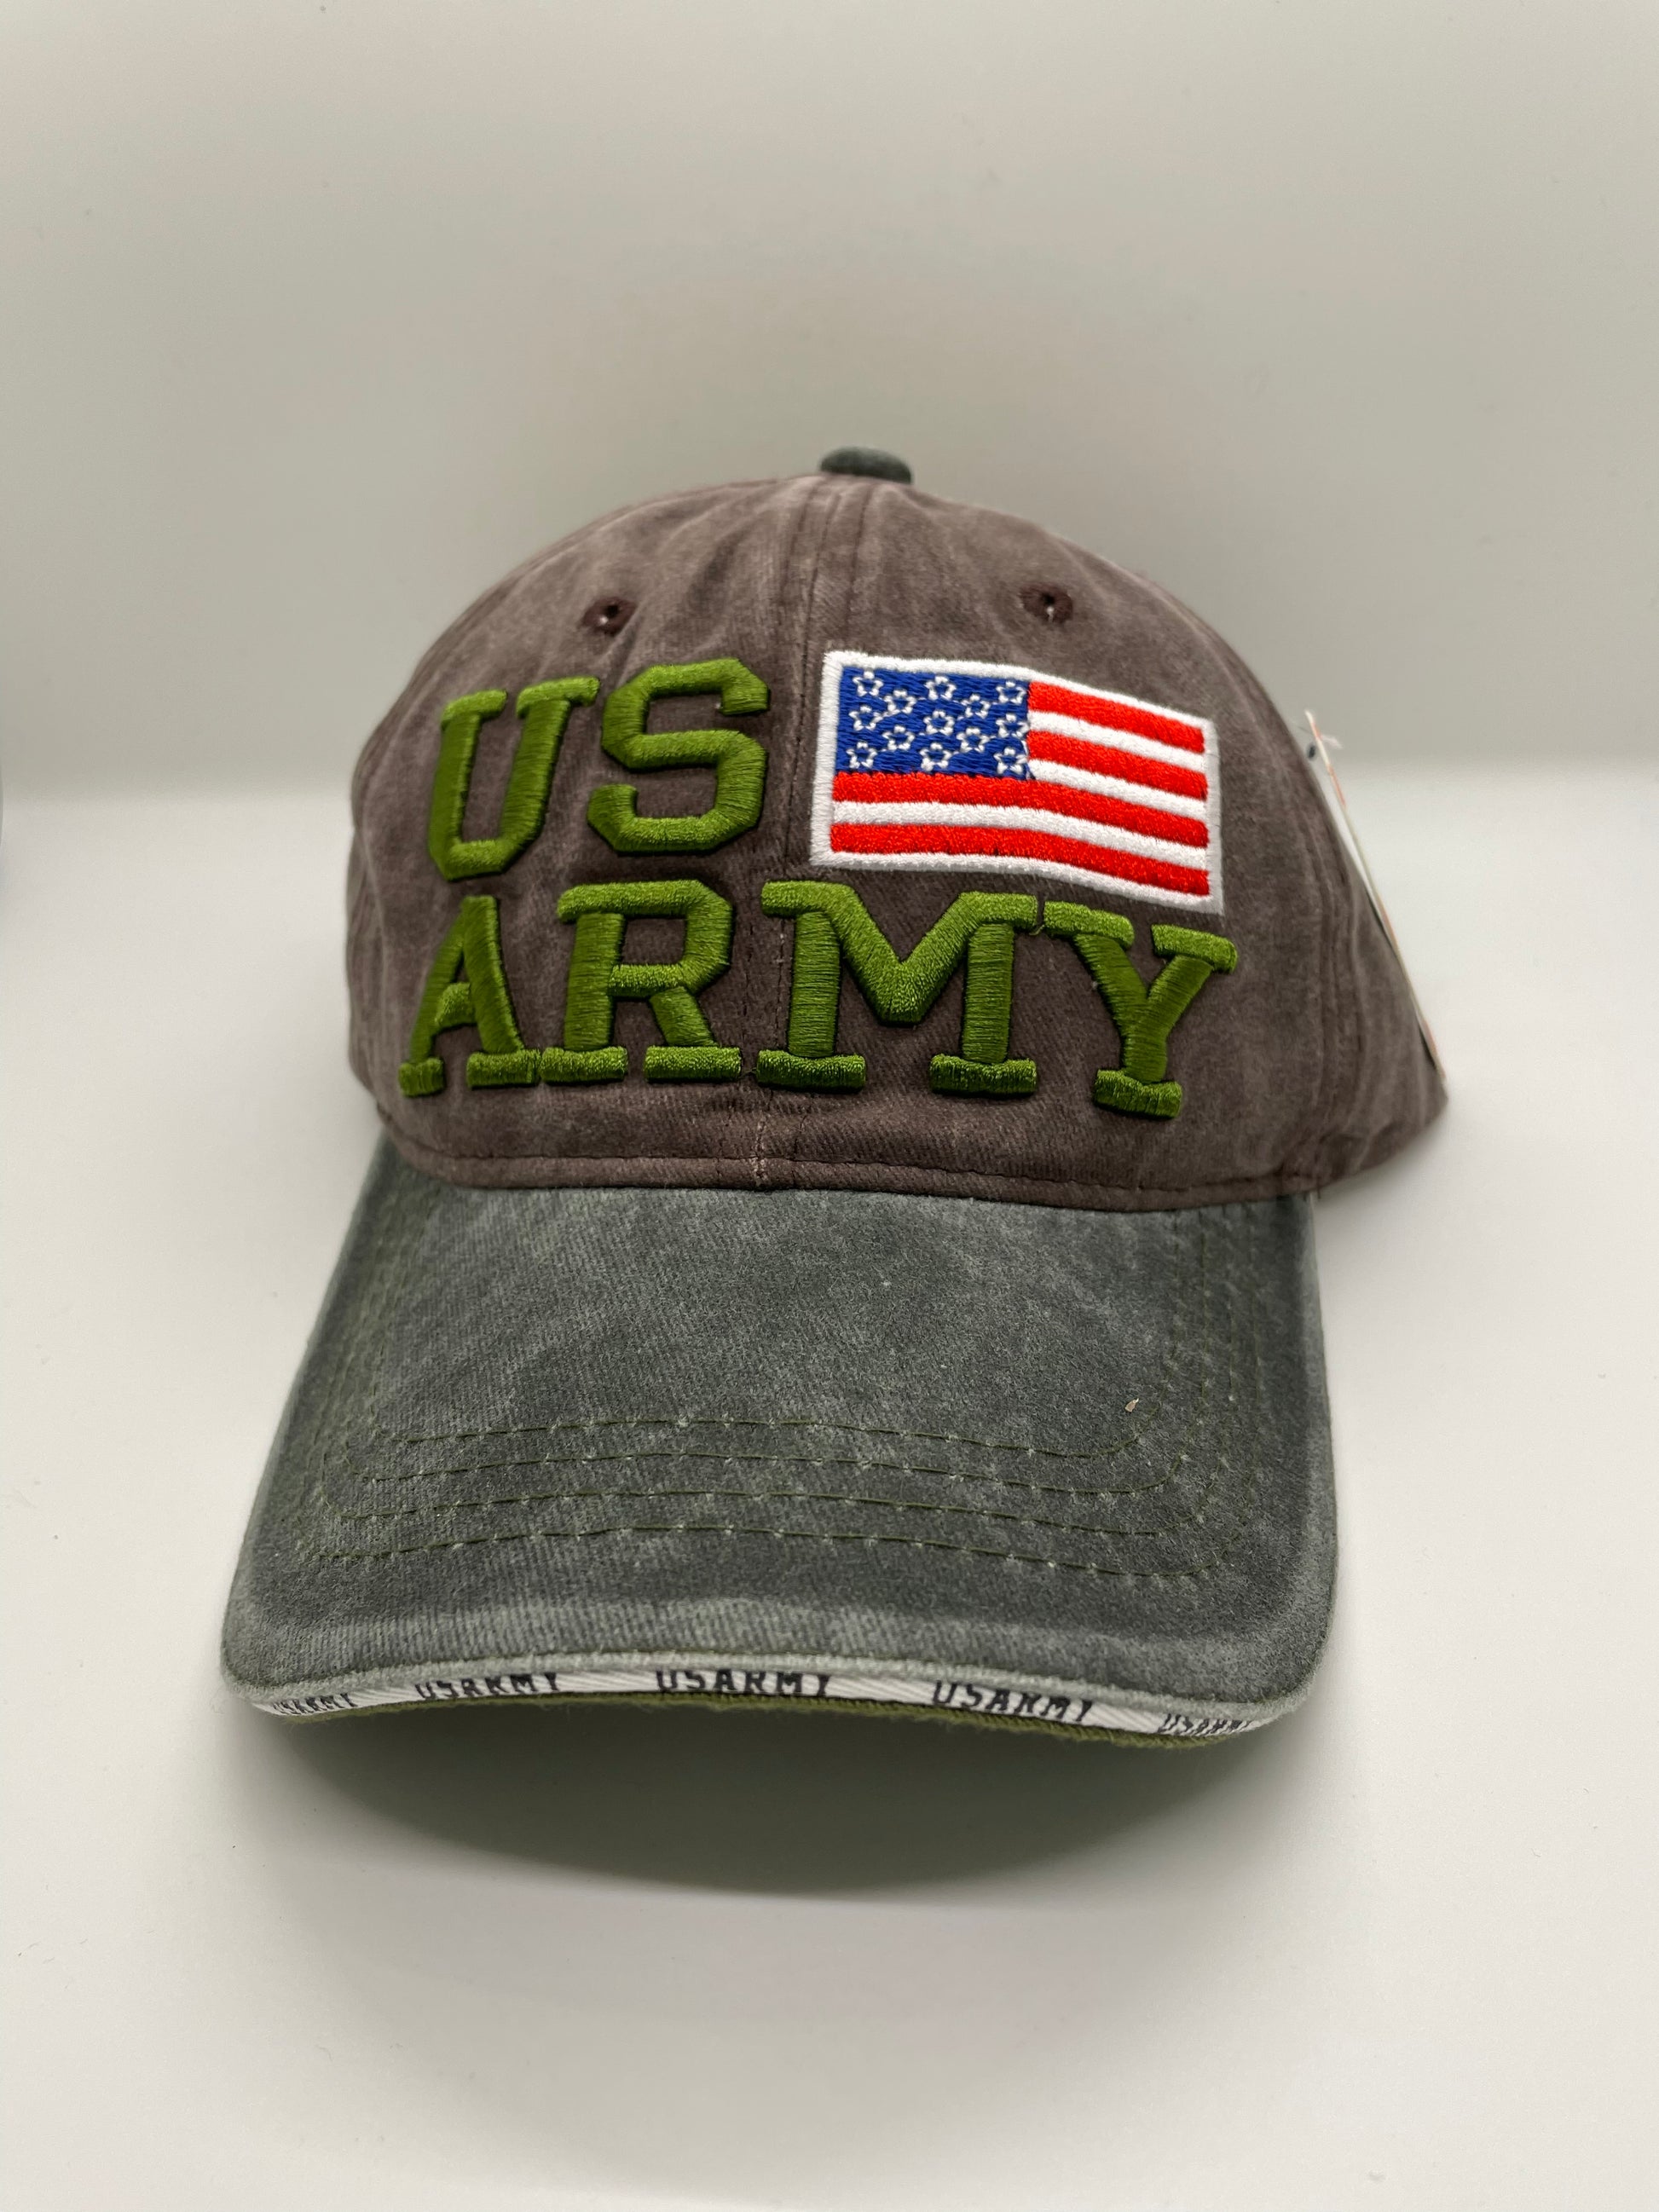 "Black US Army hat with a quilted texture and a drawstring closure"